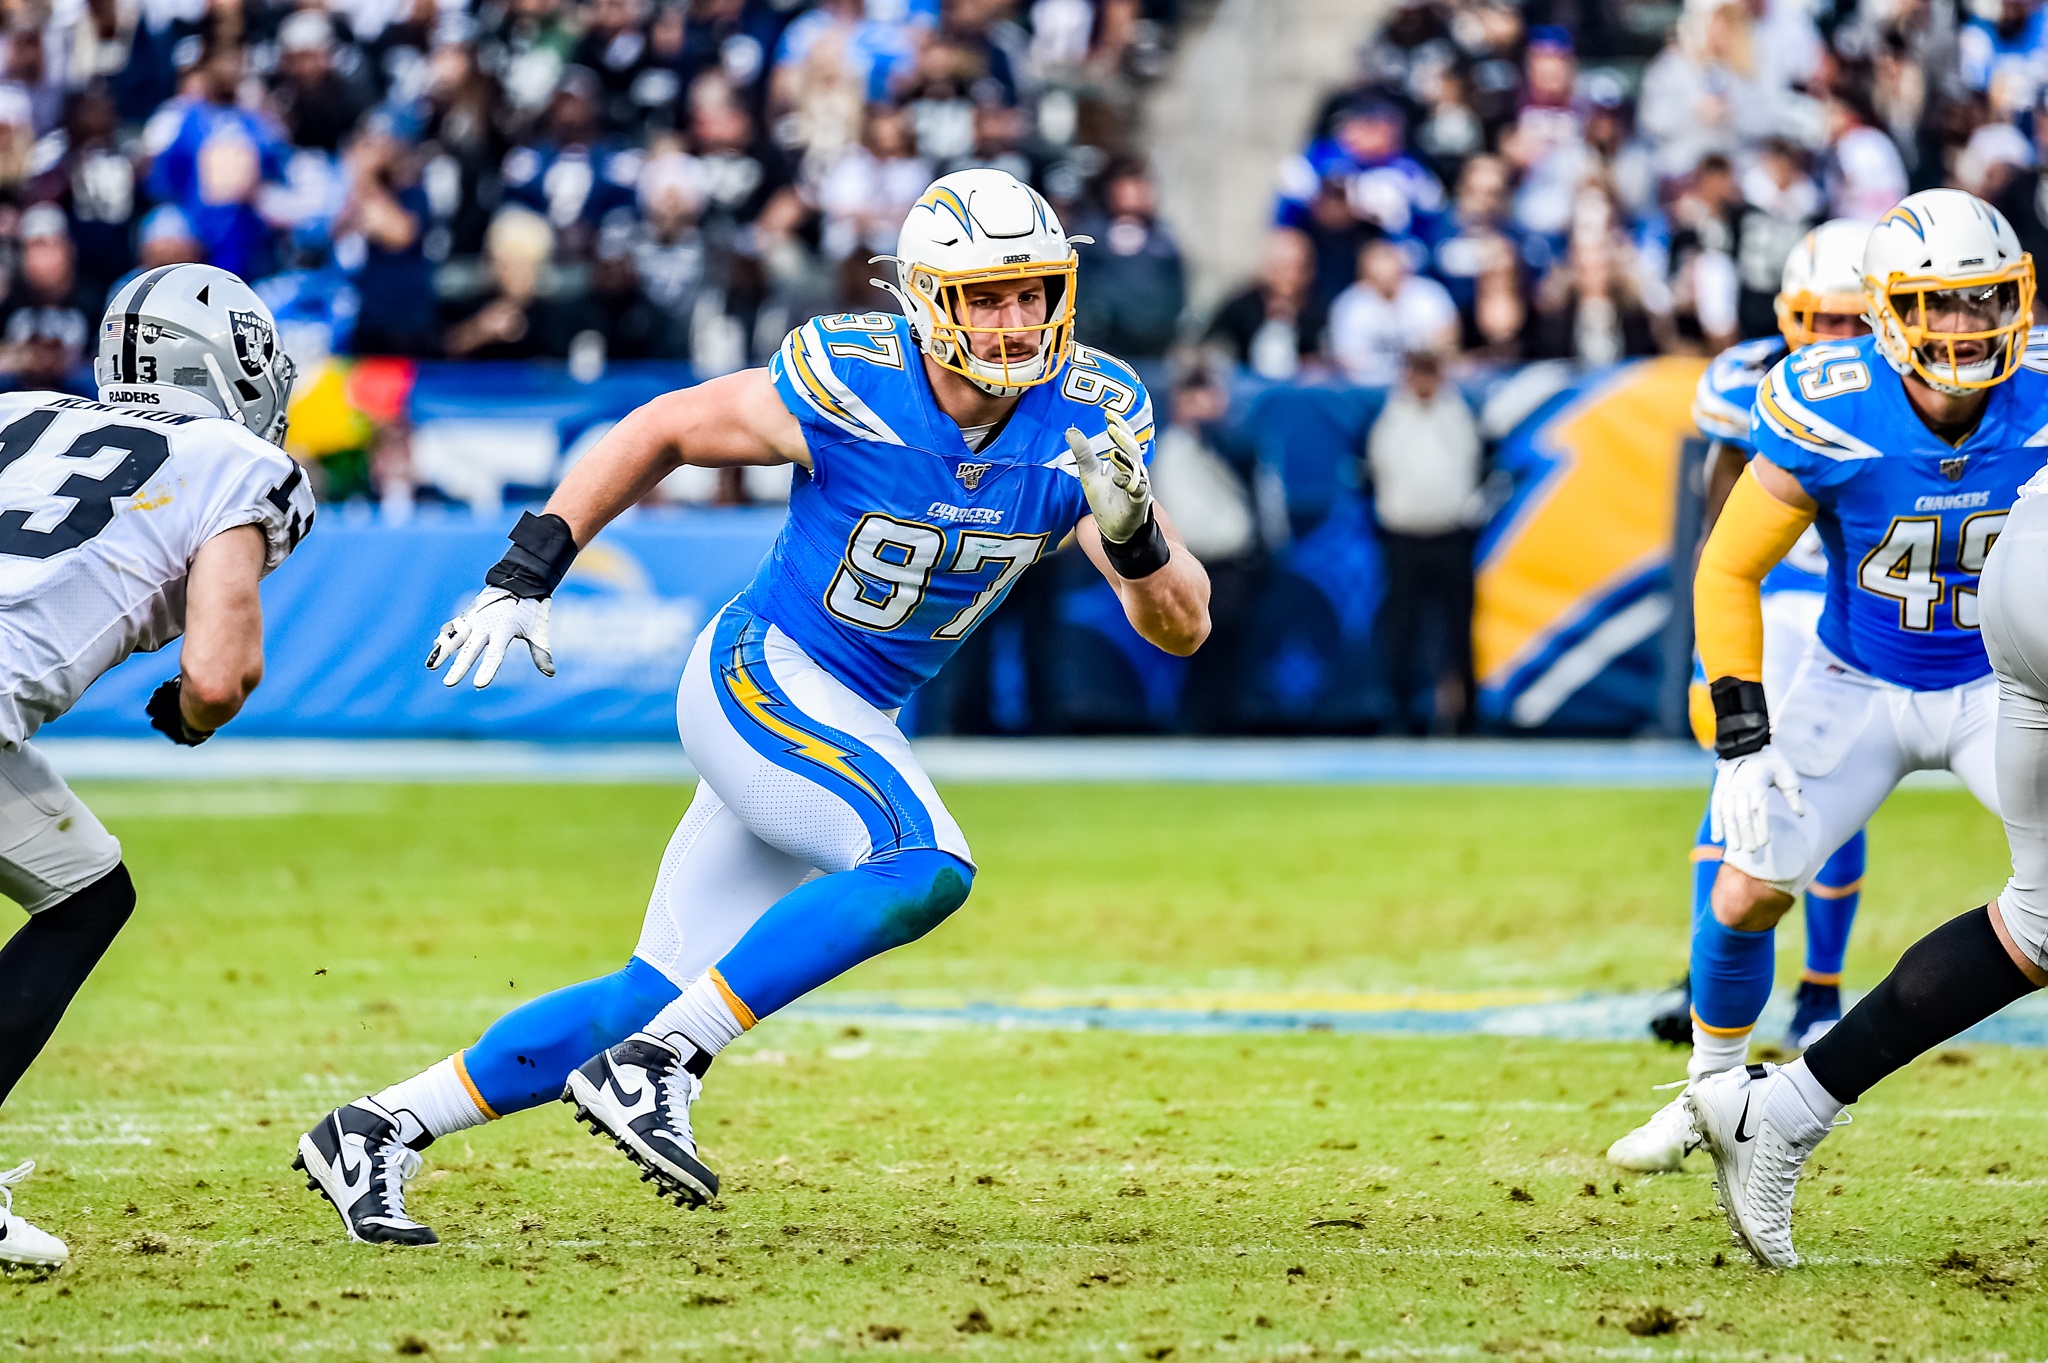 New contract, same attitude for Chargers DE Joey Bosa – News4usonline